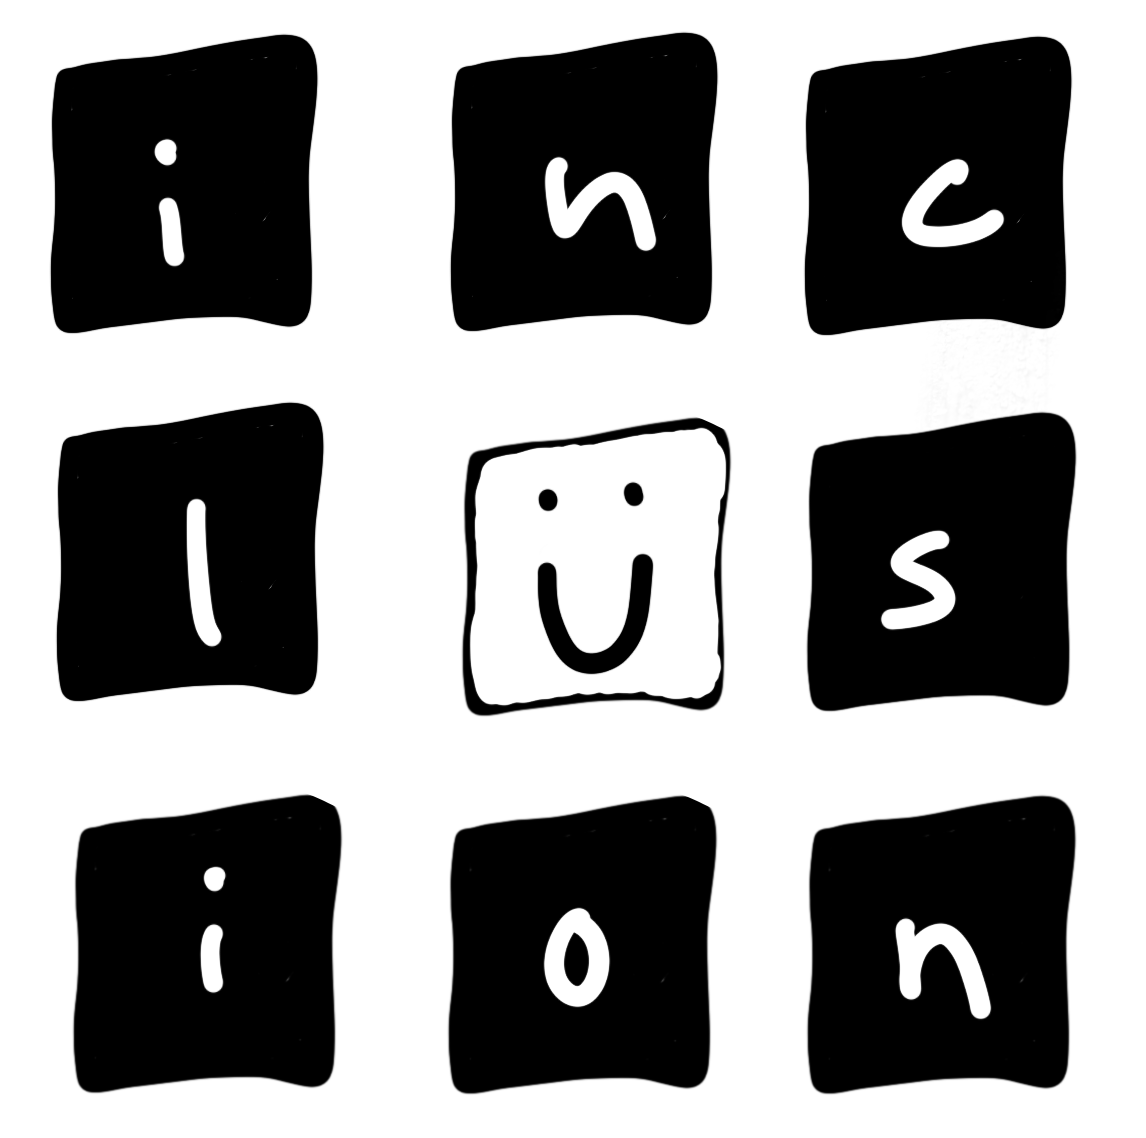 An early sketch of the inclusion tee graphic from the Procreate app for iPad